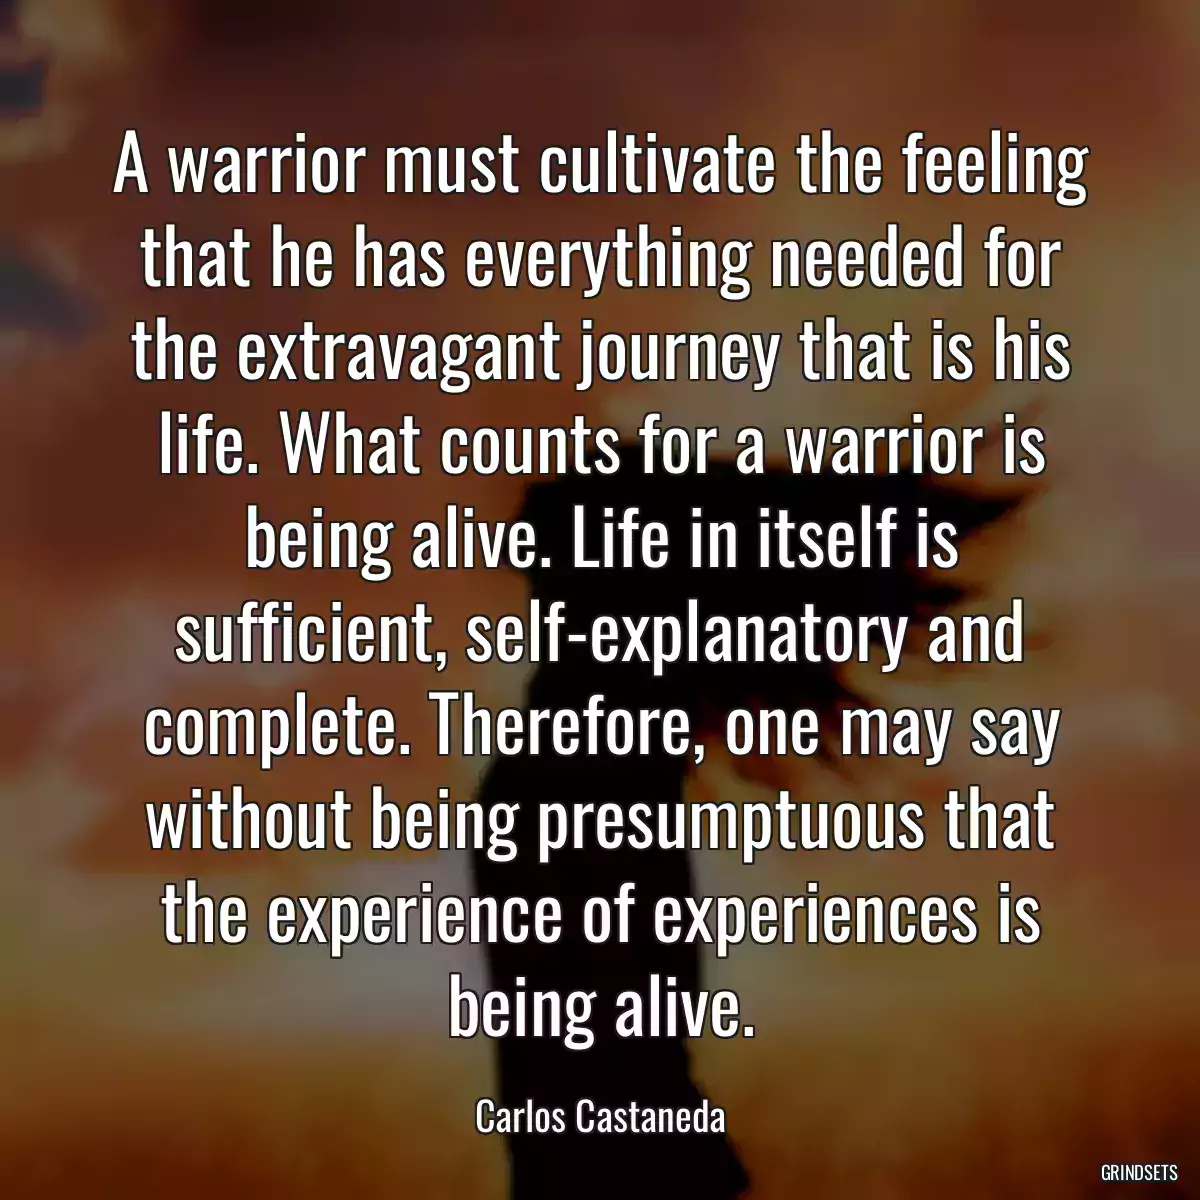 A warrior must cultivate the feeling that he has everything needed for the extravagant journey that is his life. What counts for a warrior is being alive. Life in itself is sufficient, self-explanatory and complete. Therefore, one may say without being presumptuous that the experience of experiences is being alive.